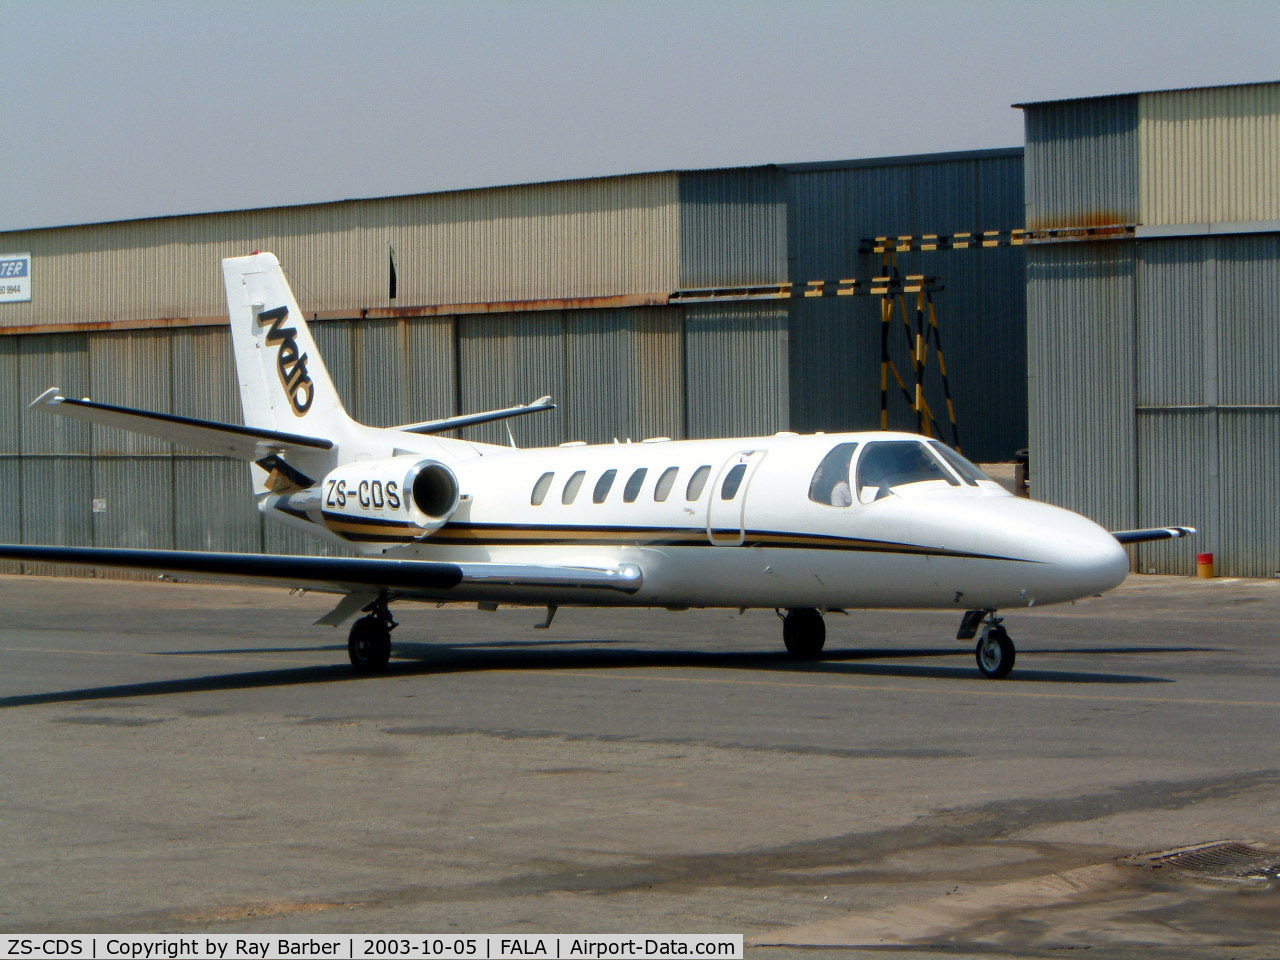 ZS-CDS, 1997 Cessna 560 Citation V C/N 560-0414, Cessna Citaton V [560-0414] Lanseria~ZS 05/10/2003. Seen taxiing out.